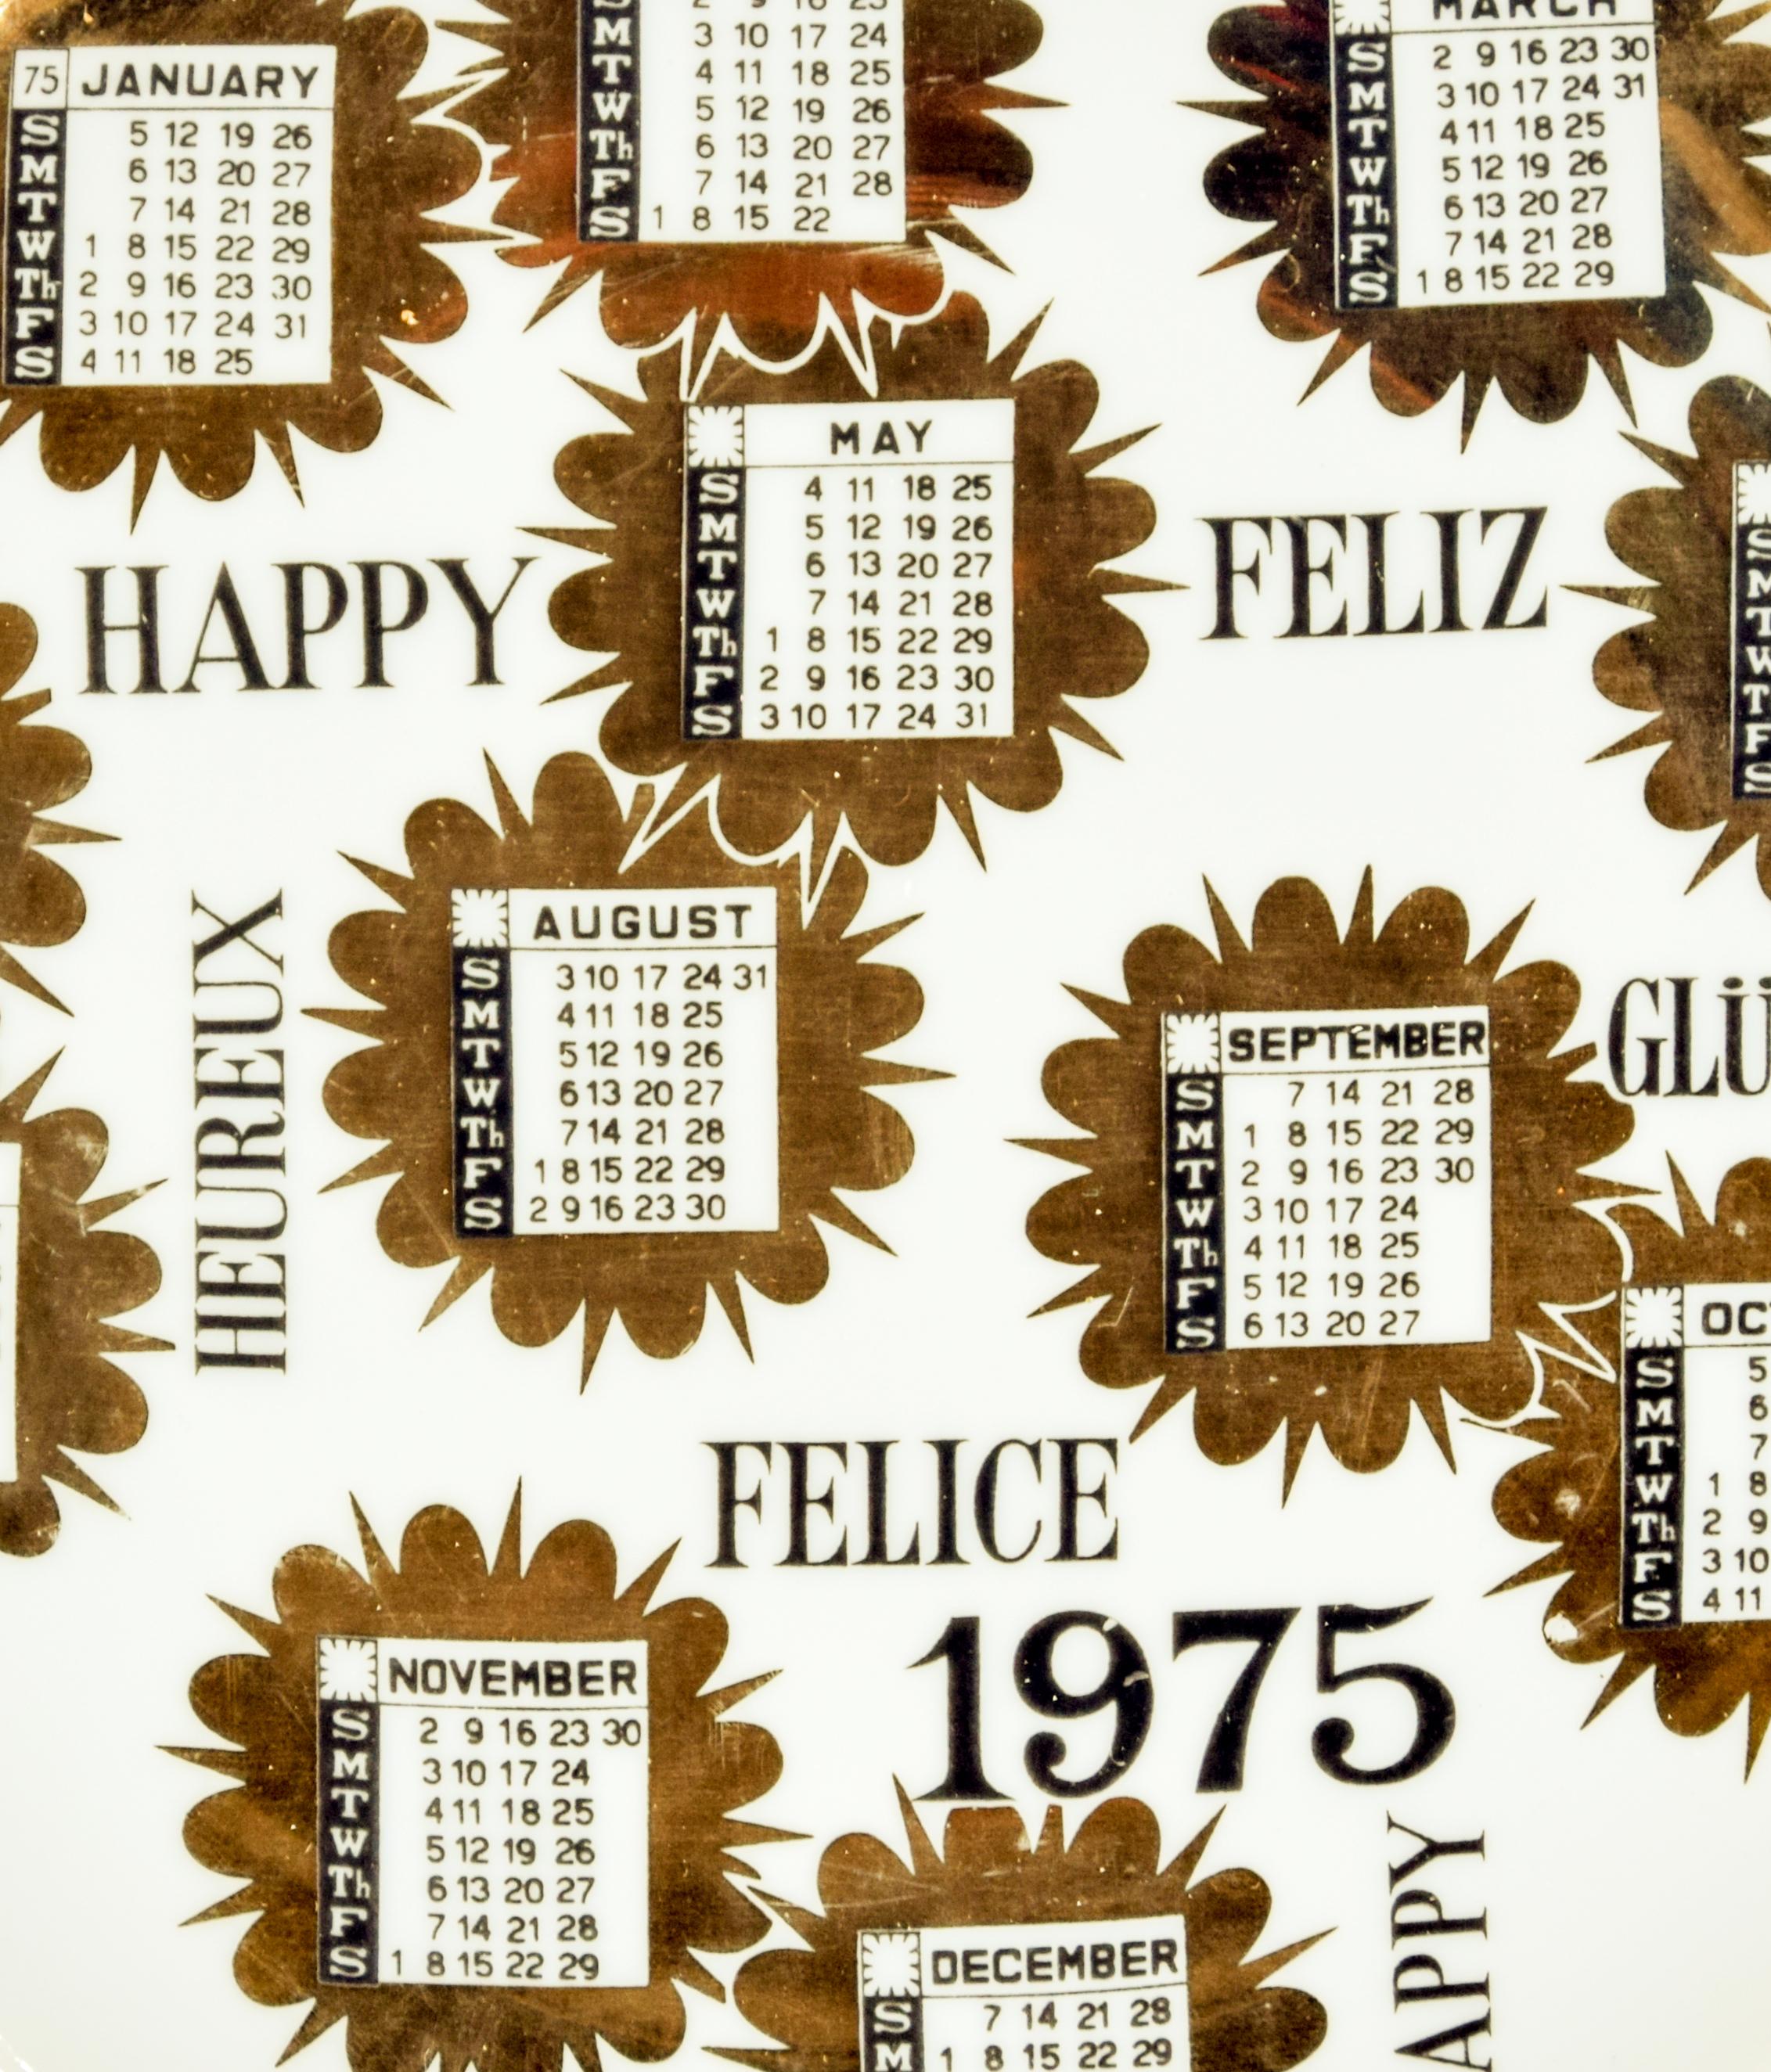 Felice 1975 Calendario is a silk-screened porcelain plate, designed by Piero Fornasetti in 1975 from the Calendario series, the Happy New Year dishes series. 

In very good conditions.

Black and white ceramic Fornasetti wall plate, illustrated